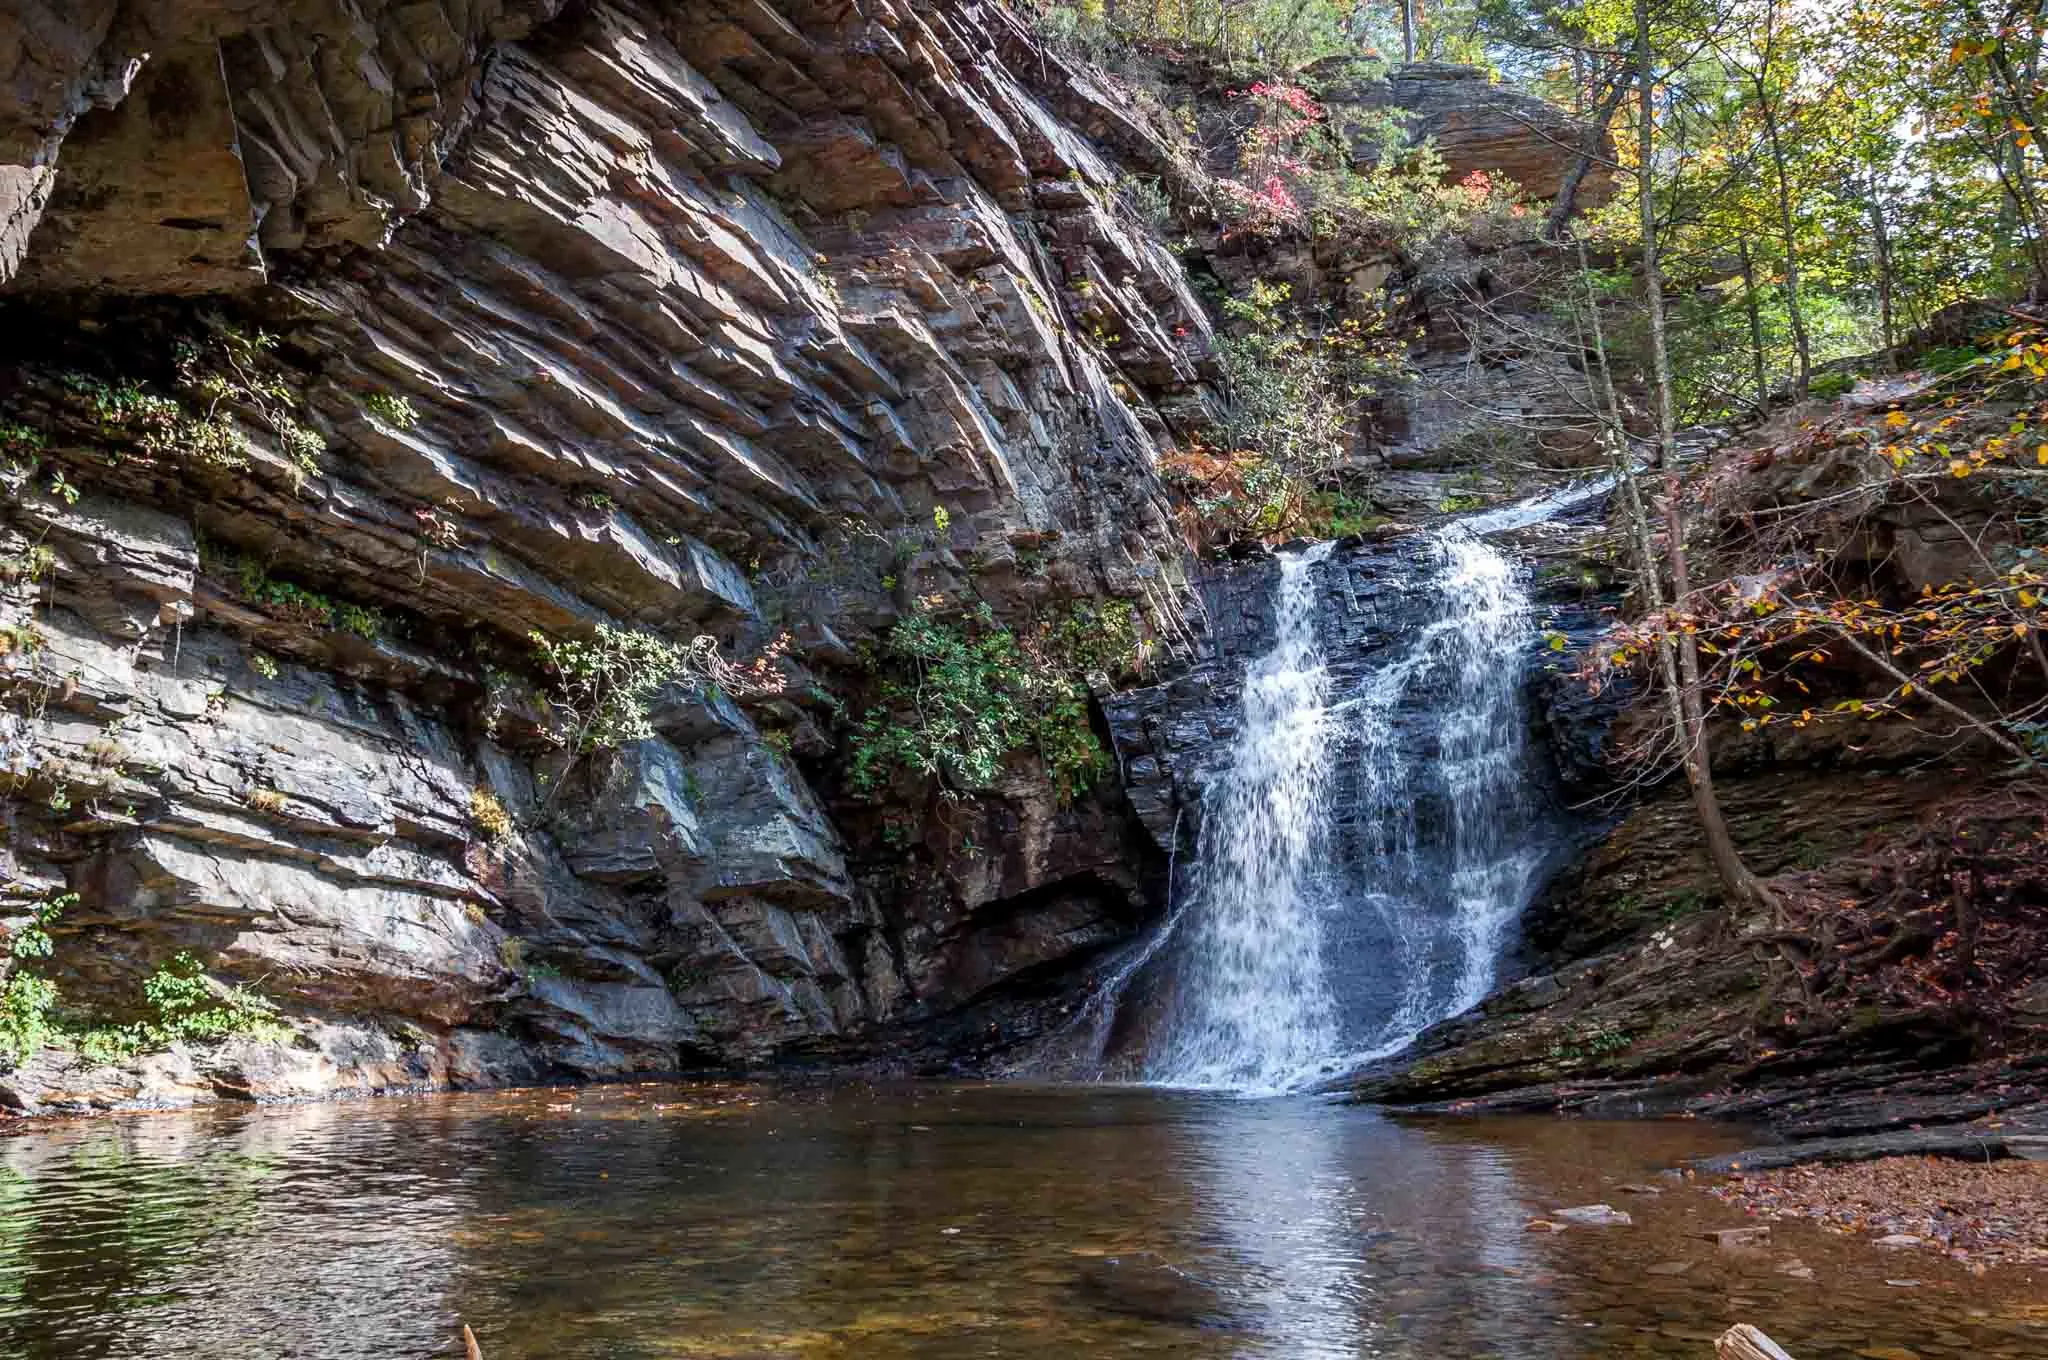 Waterfall surrounded by fall foliage in Hanging Rock State Park.